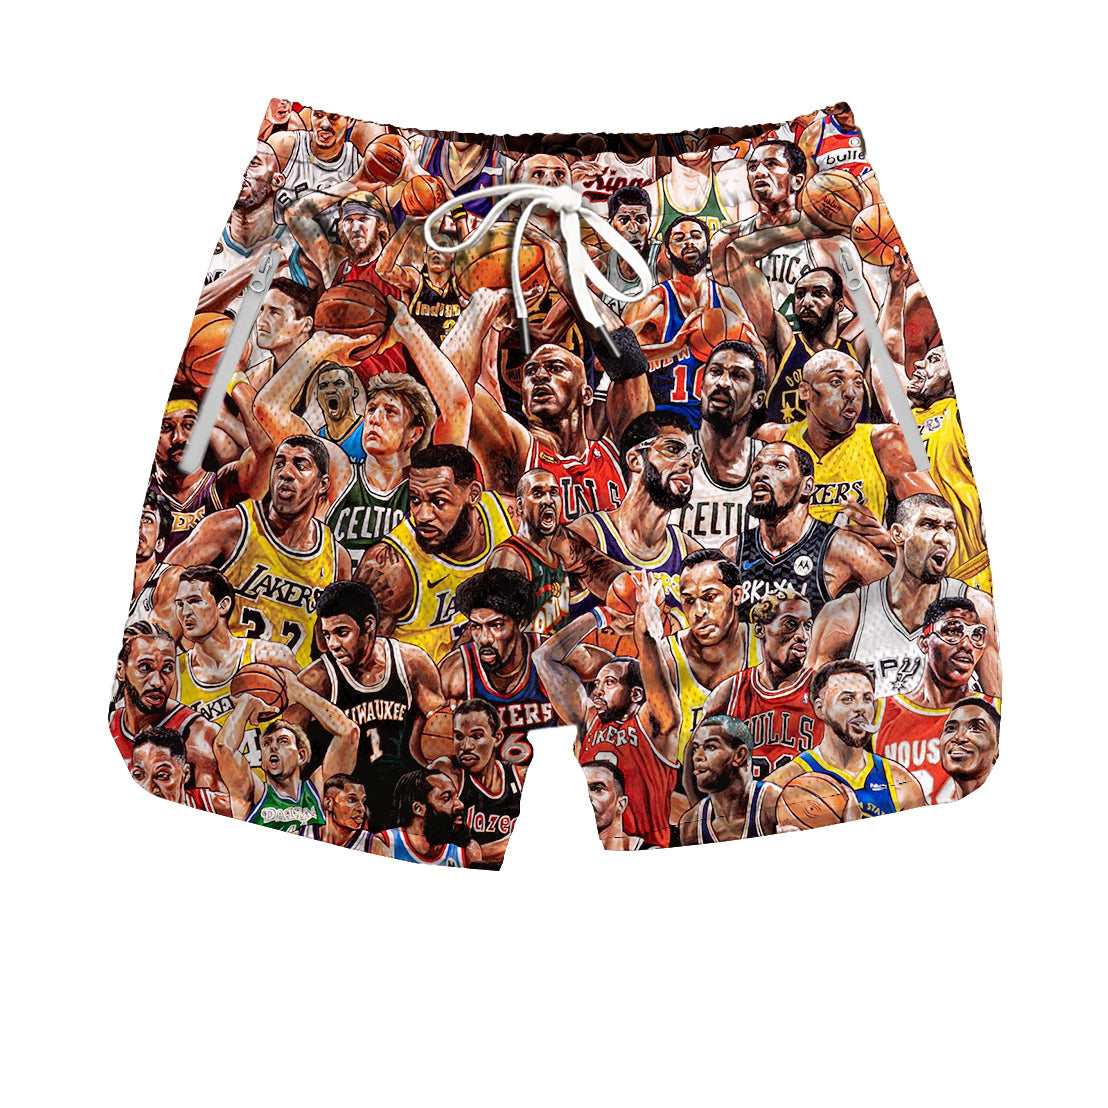 Legends - Shorts - Youth